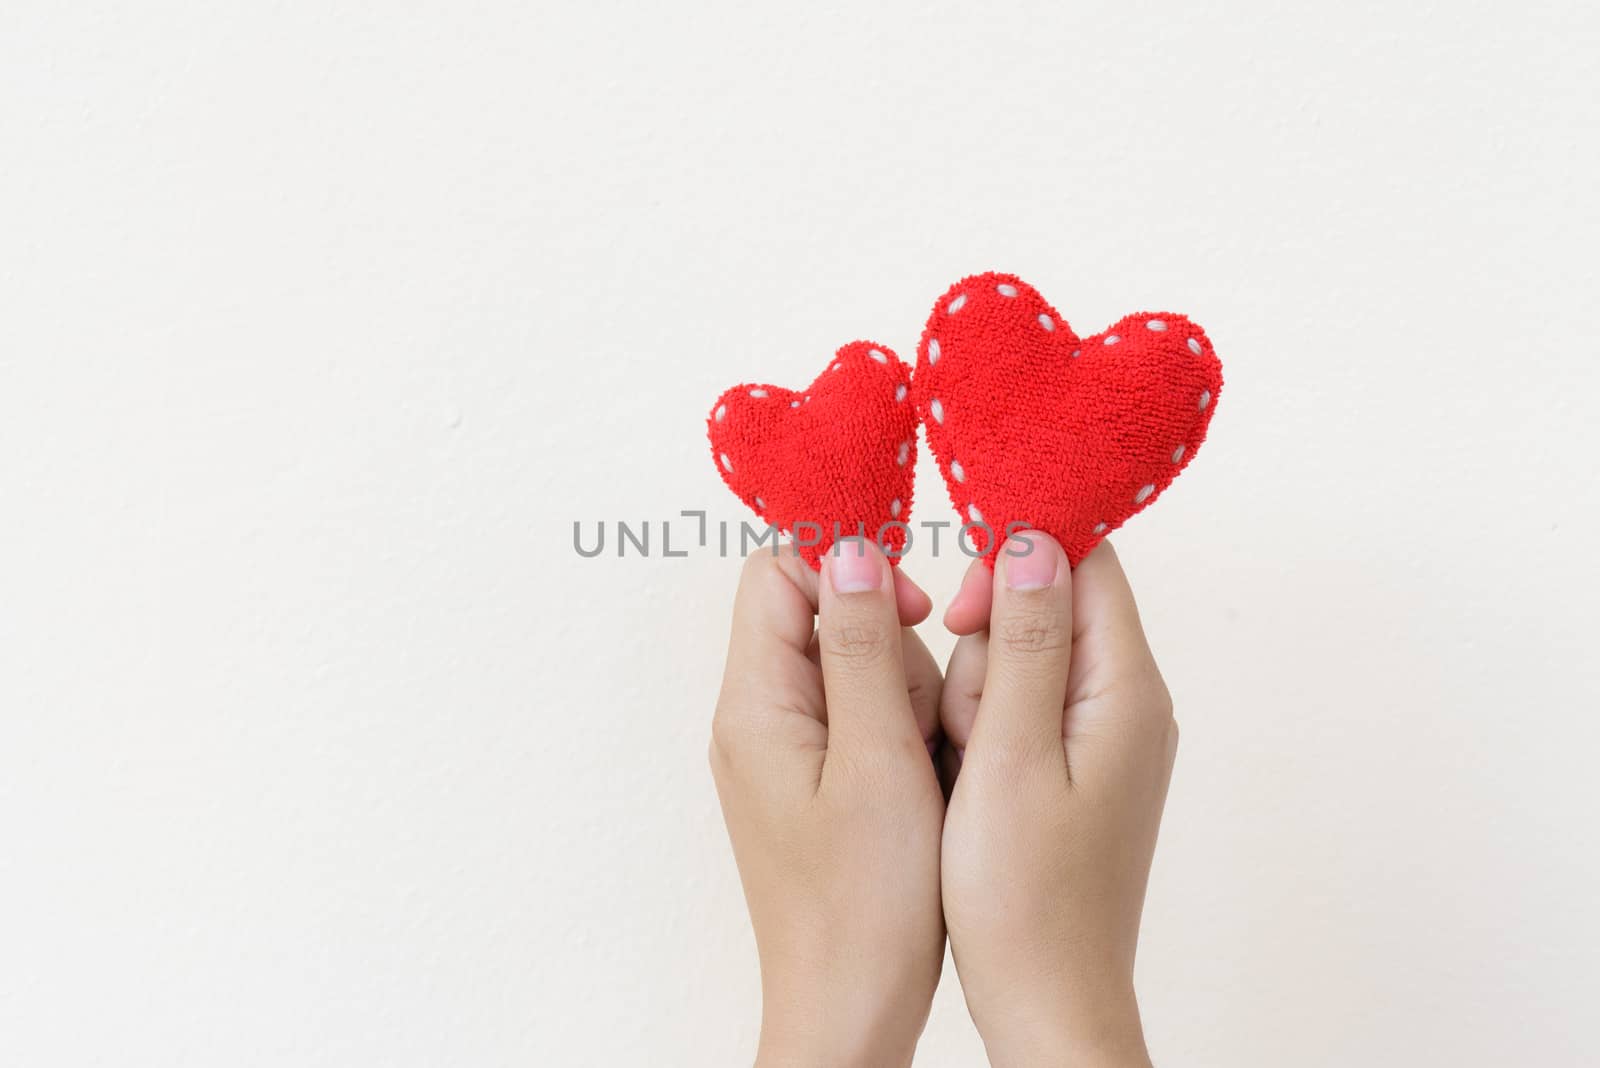 Two hands holding two red hearts on white background. Happy, Love, Valentines day idea, sign, symbol, concept.